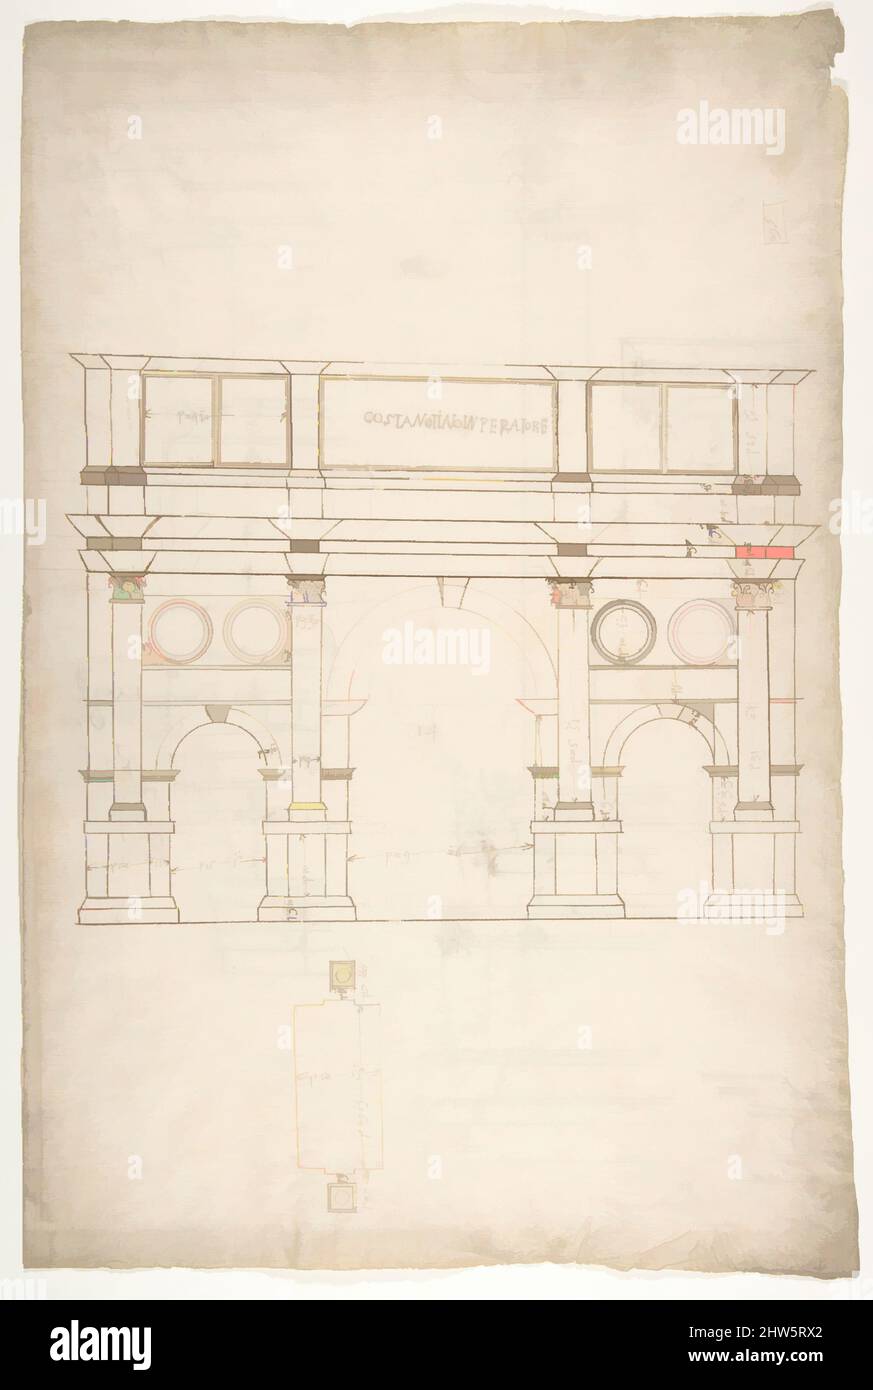 Art inspired by Arch of Constantine, elev, partial plan (recto) Arch of Constantine, profiles of base, shaft and entablature (verso), ca. 1540–60, Dark brown ink, black chalk, and incised lines, sheet: 17 5/16 x 11 9/16 in. (44 x 29.3 cm, Classic works modernized by Artotop with a splash of modernity. Shapes, color and value, eye-catching visual impact on art. Emotions through freedom of artworks in a contemporary way. A timeless message pursuing a wildly creative new direction. Artists turning to the digital medium and creating the Artotop NFT Stock Photo